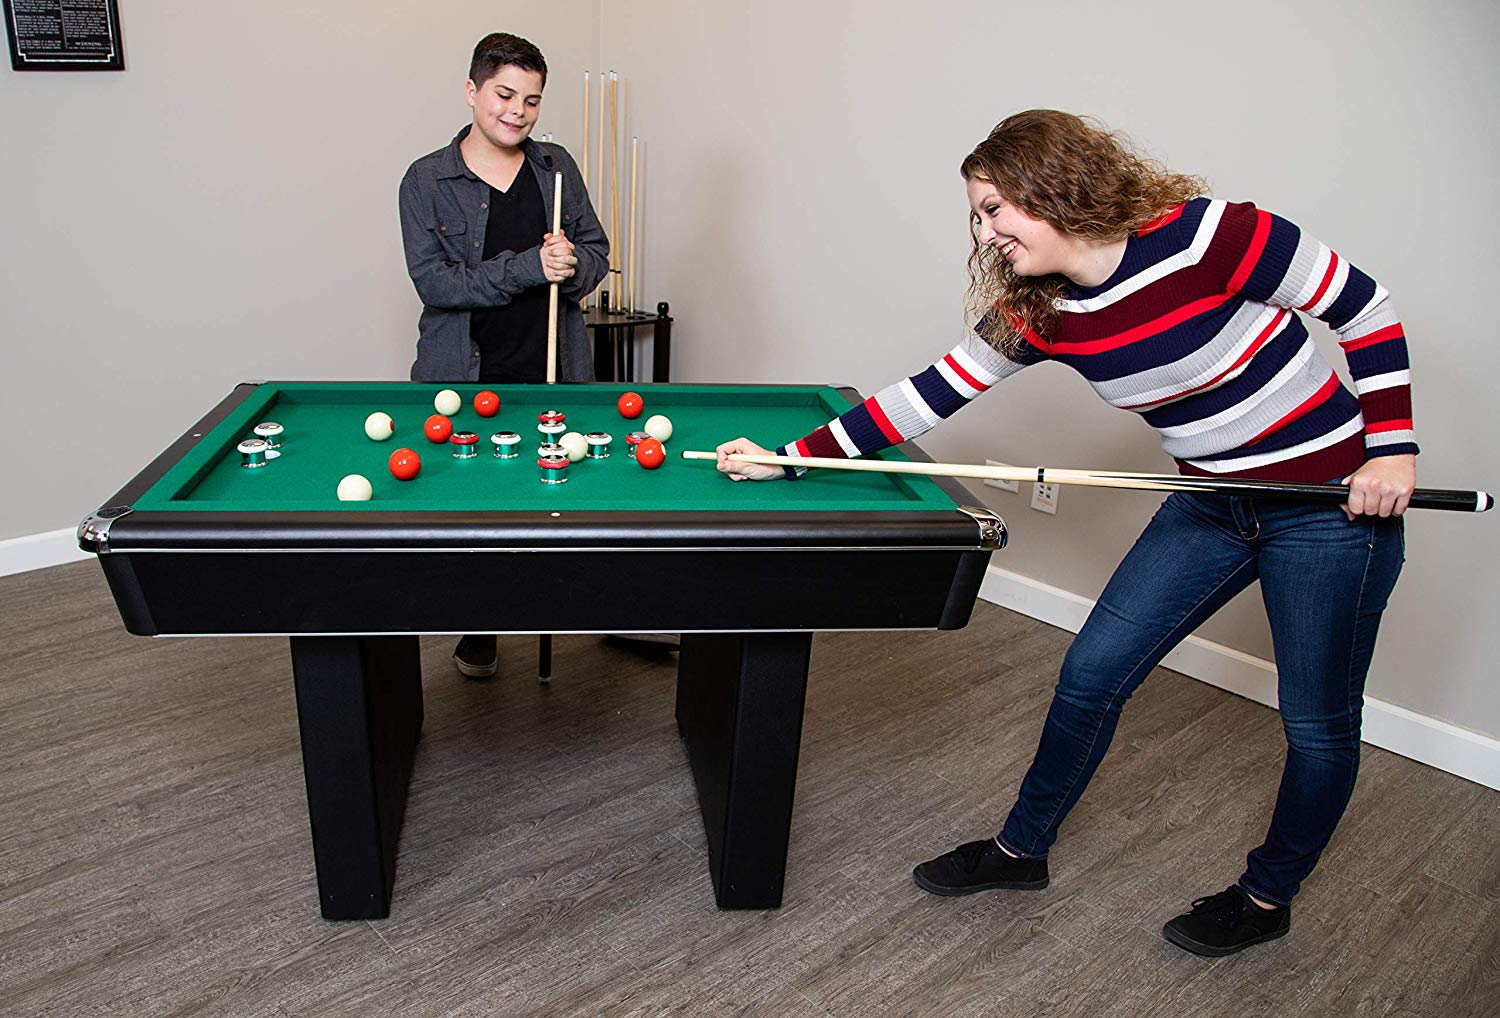 Best Bumper Pool Table: Reviews, Strategy, Buying Guide, and FAQs 2022